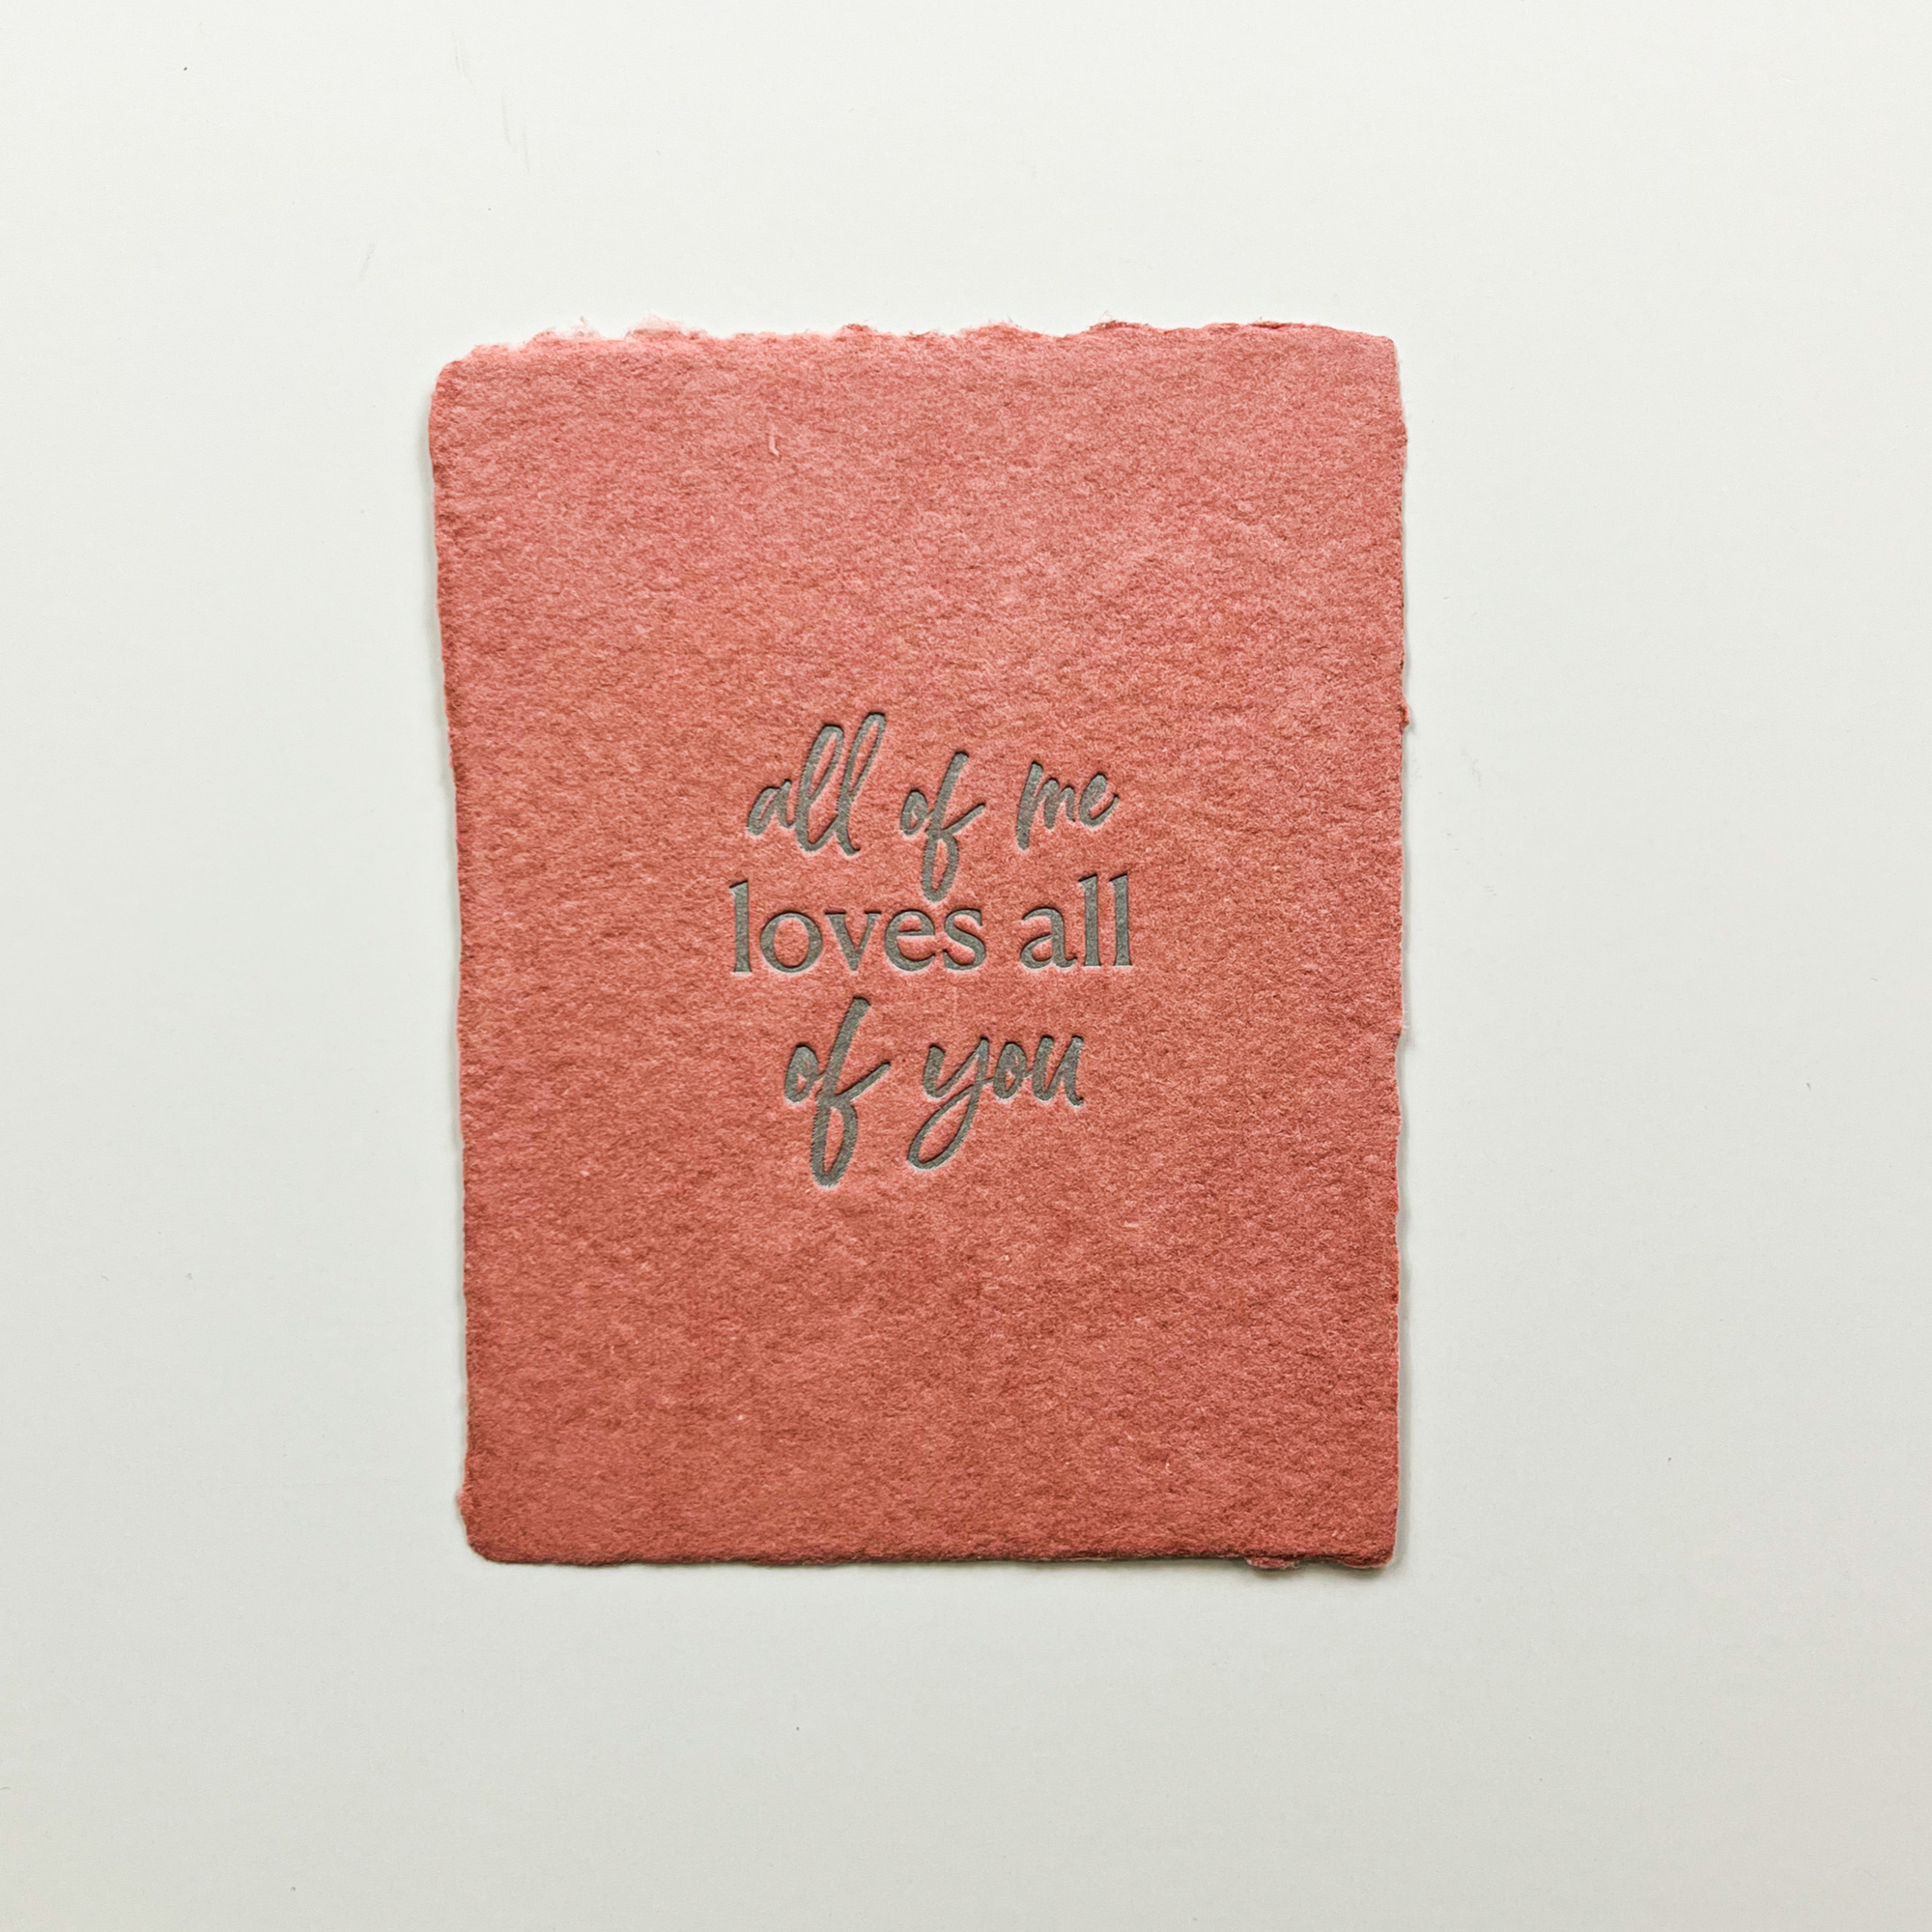 "All of me loves all of you" Greeting Card